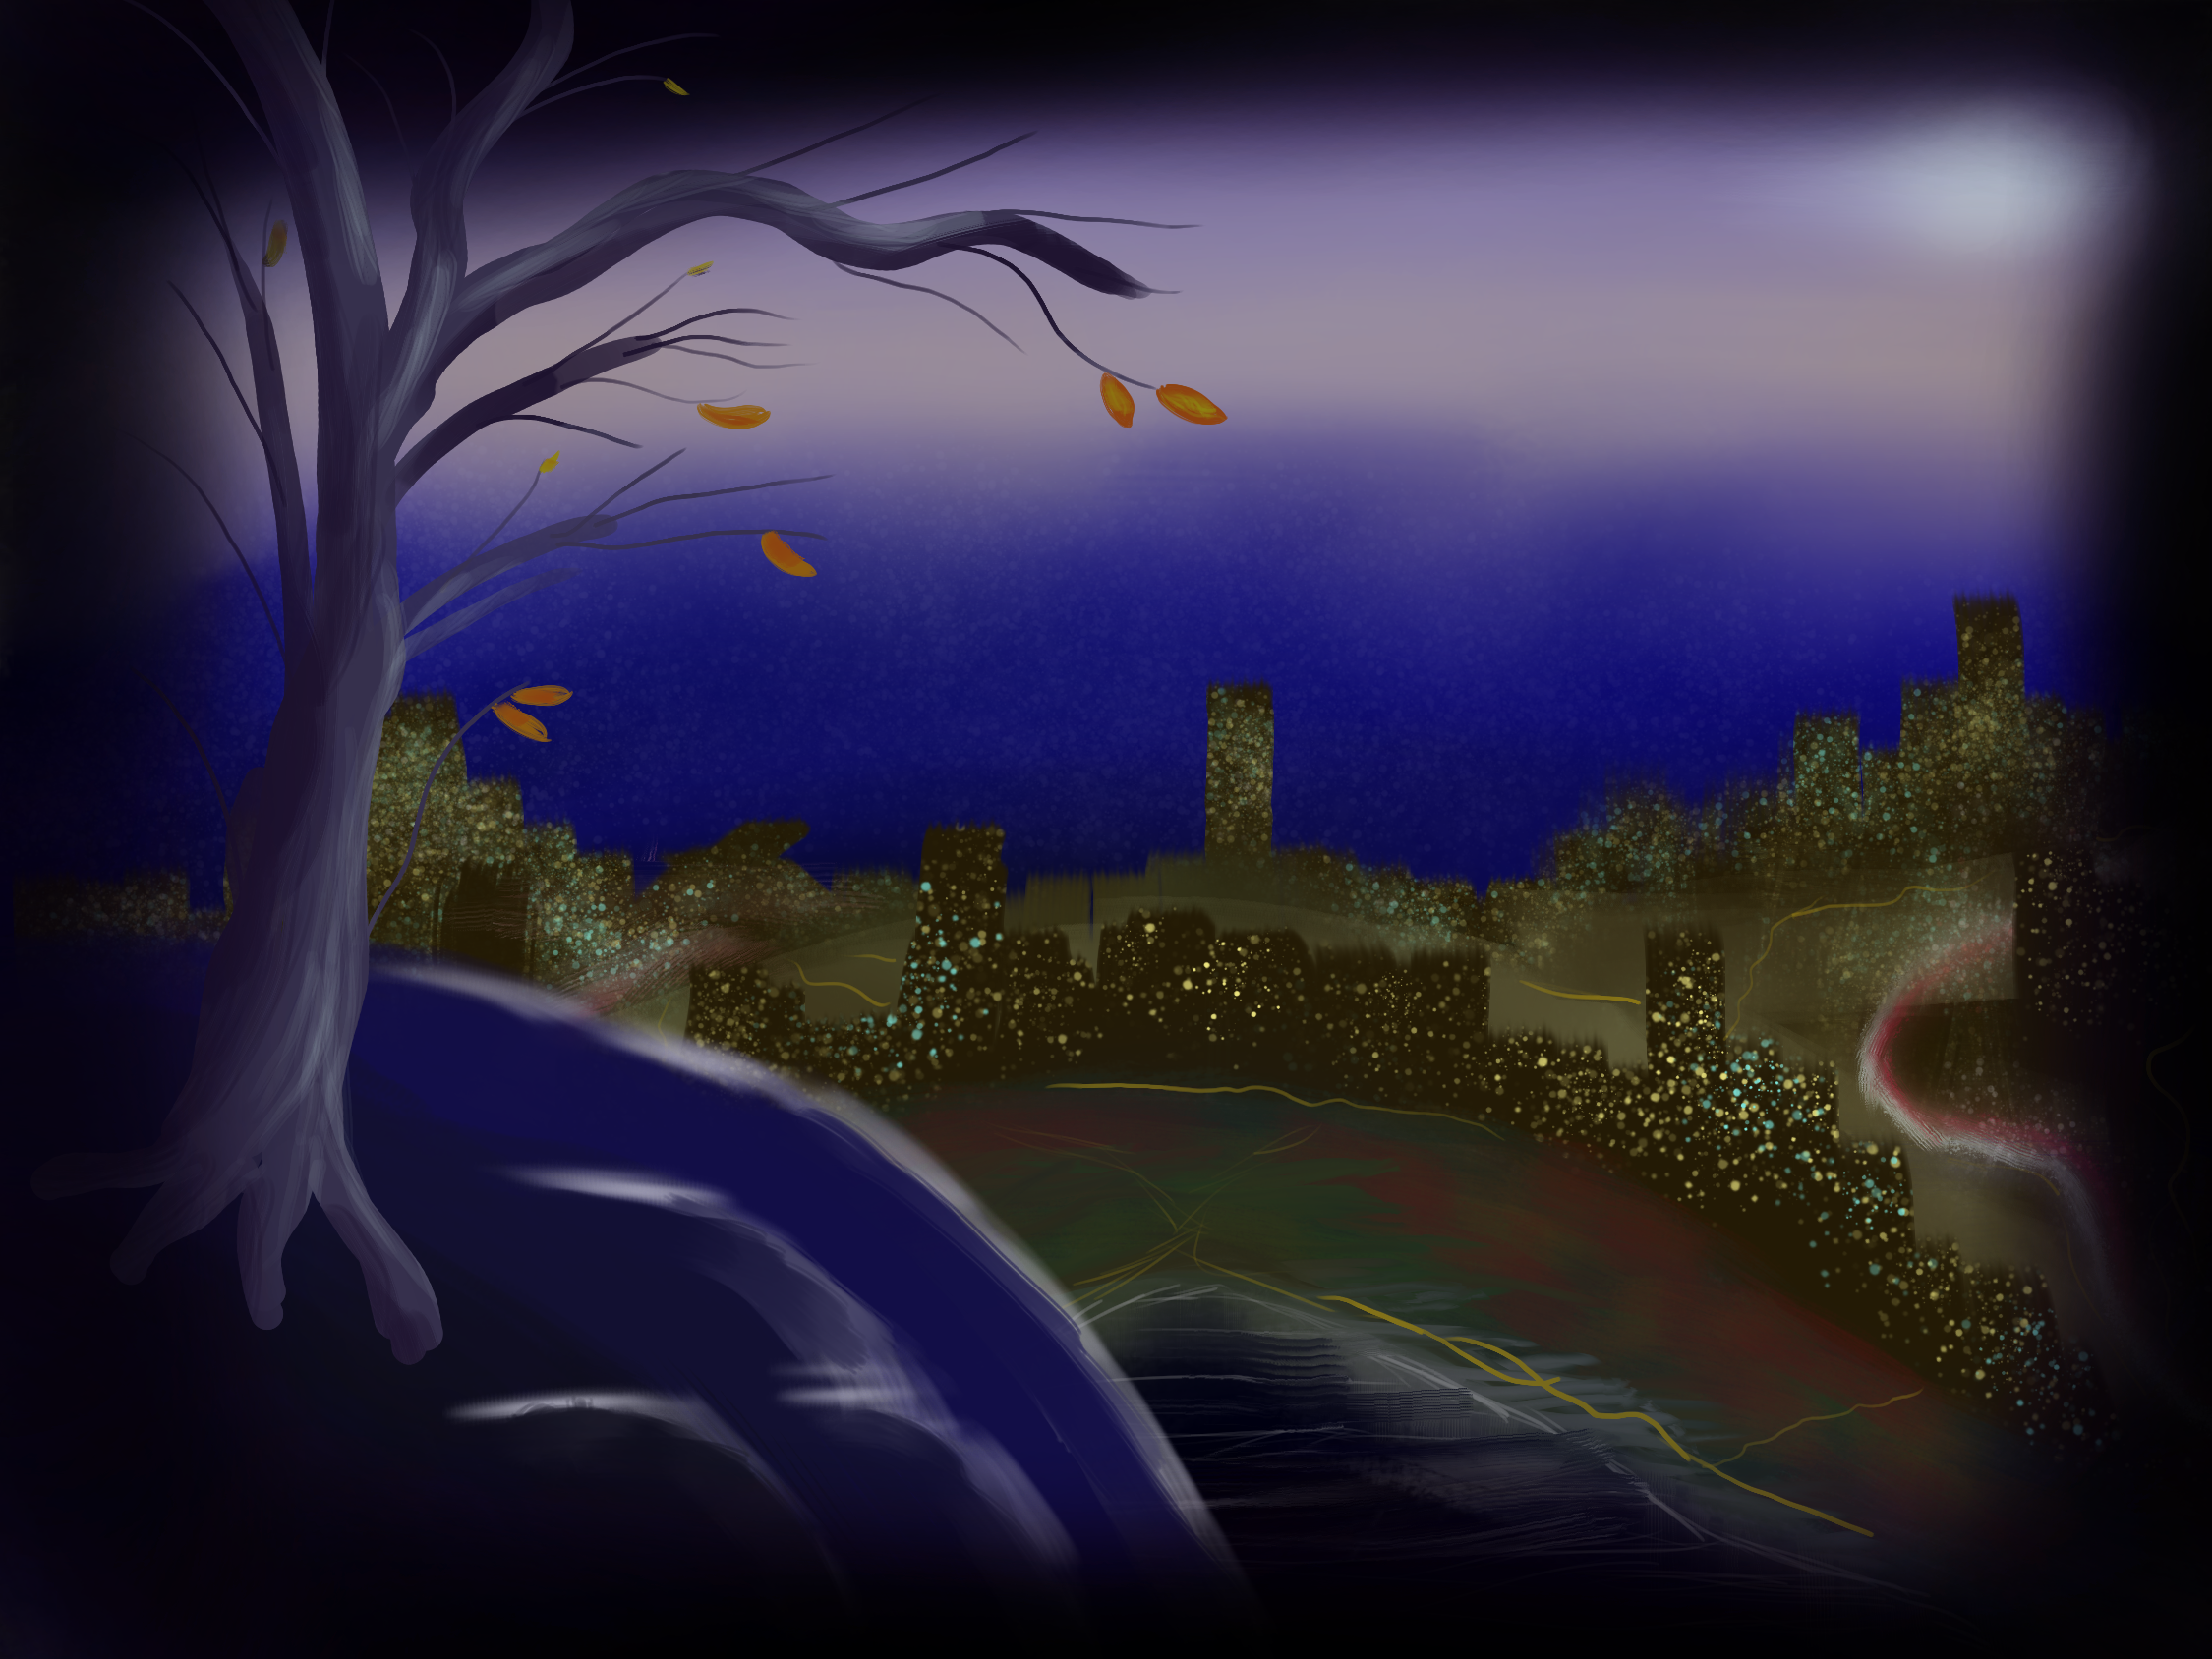 Autumn view of a big city from a hill with a tree (done while watching bob ross's "joy of painting")